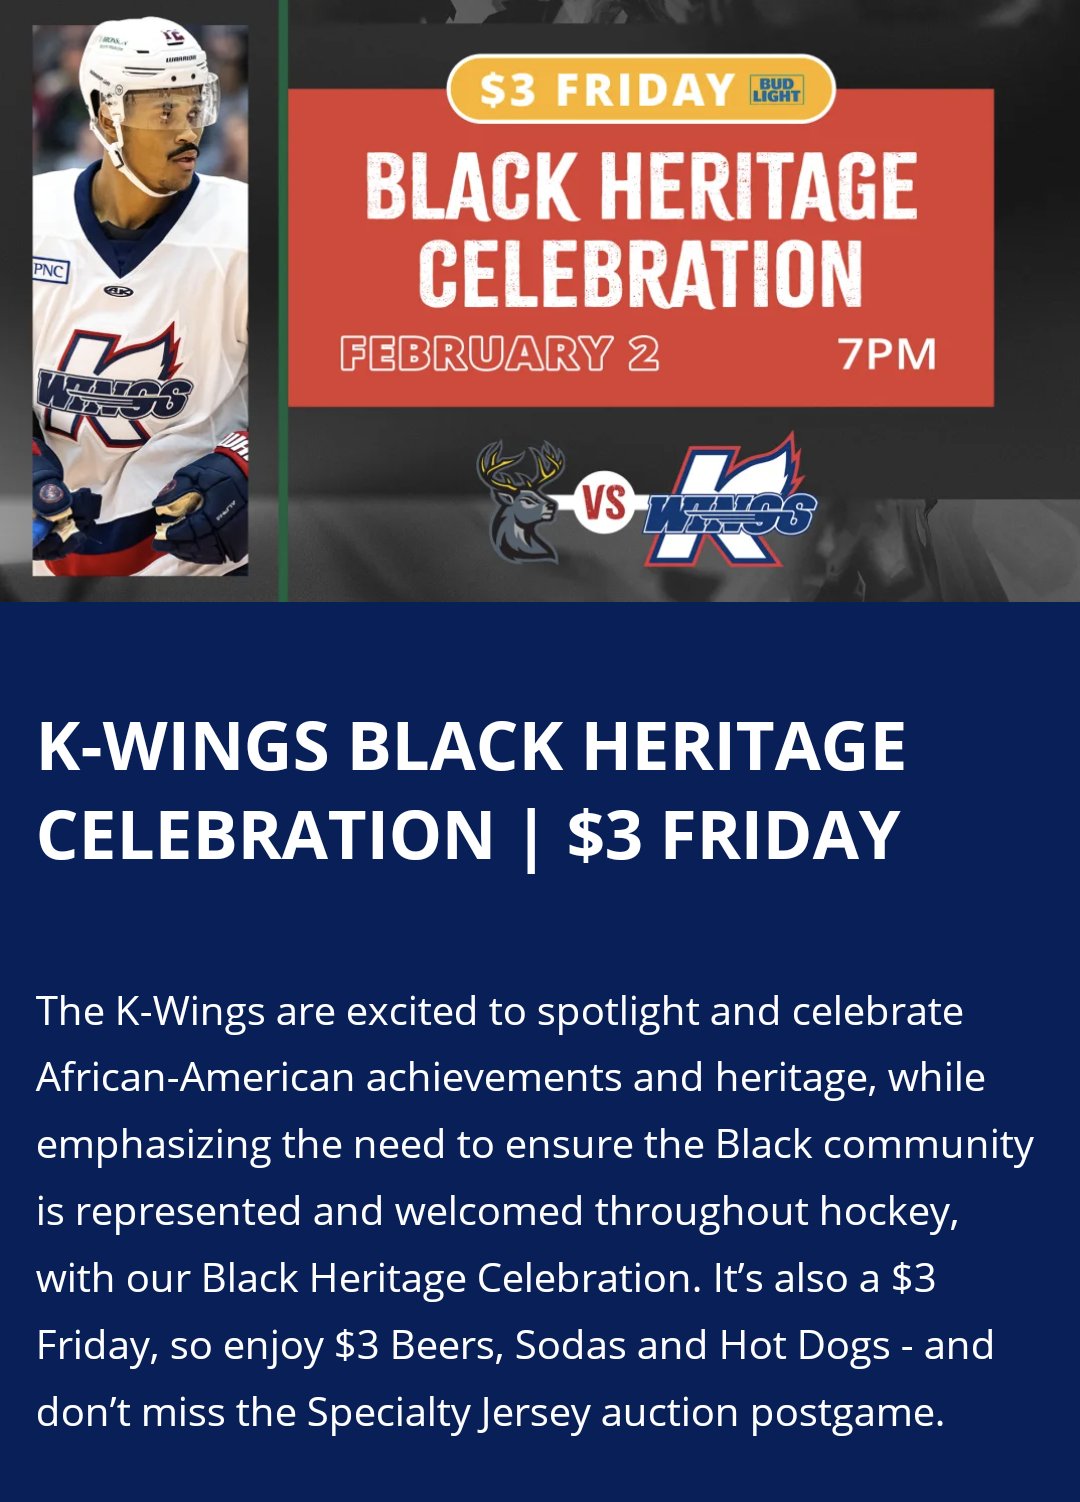 K-WINGS PARTNER WITH BELL'S BREWERY FOR SPECIAL JERSEY AUCTION